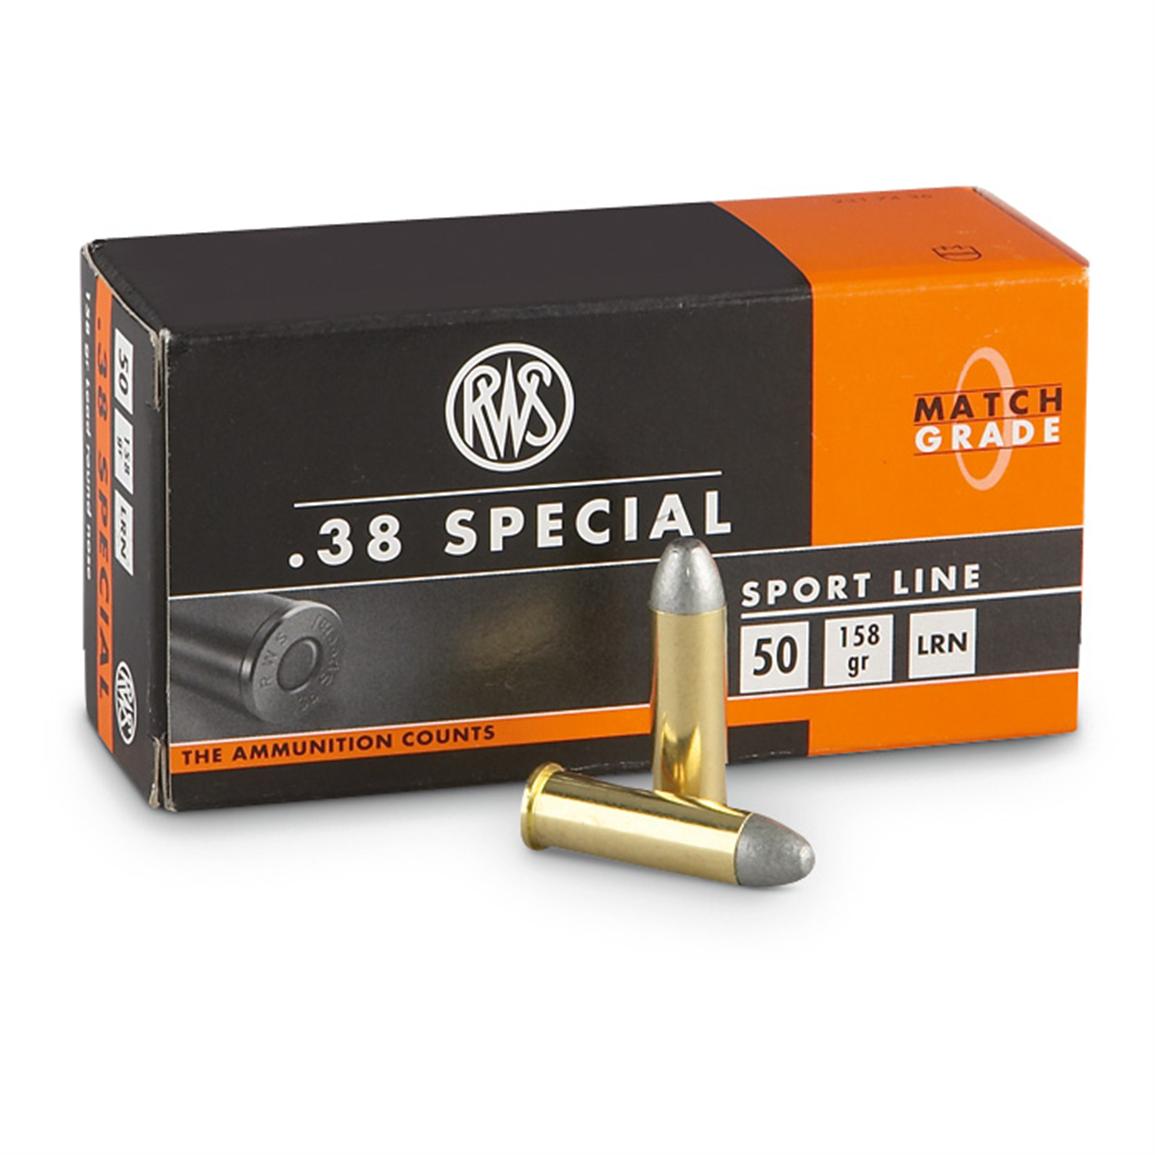 1000 Rounds Rws® 38 Special 158 Grain Ammo 180704 38 Special Ammo At Sportsmans Guide 